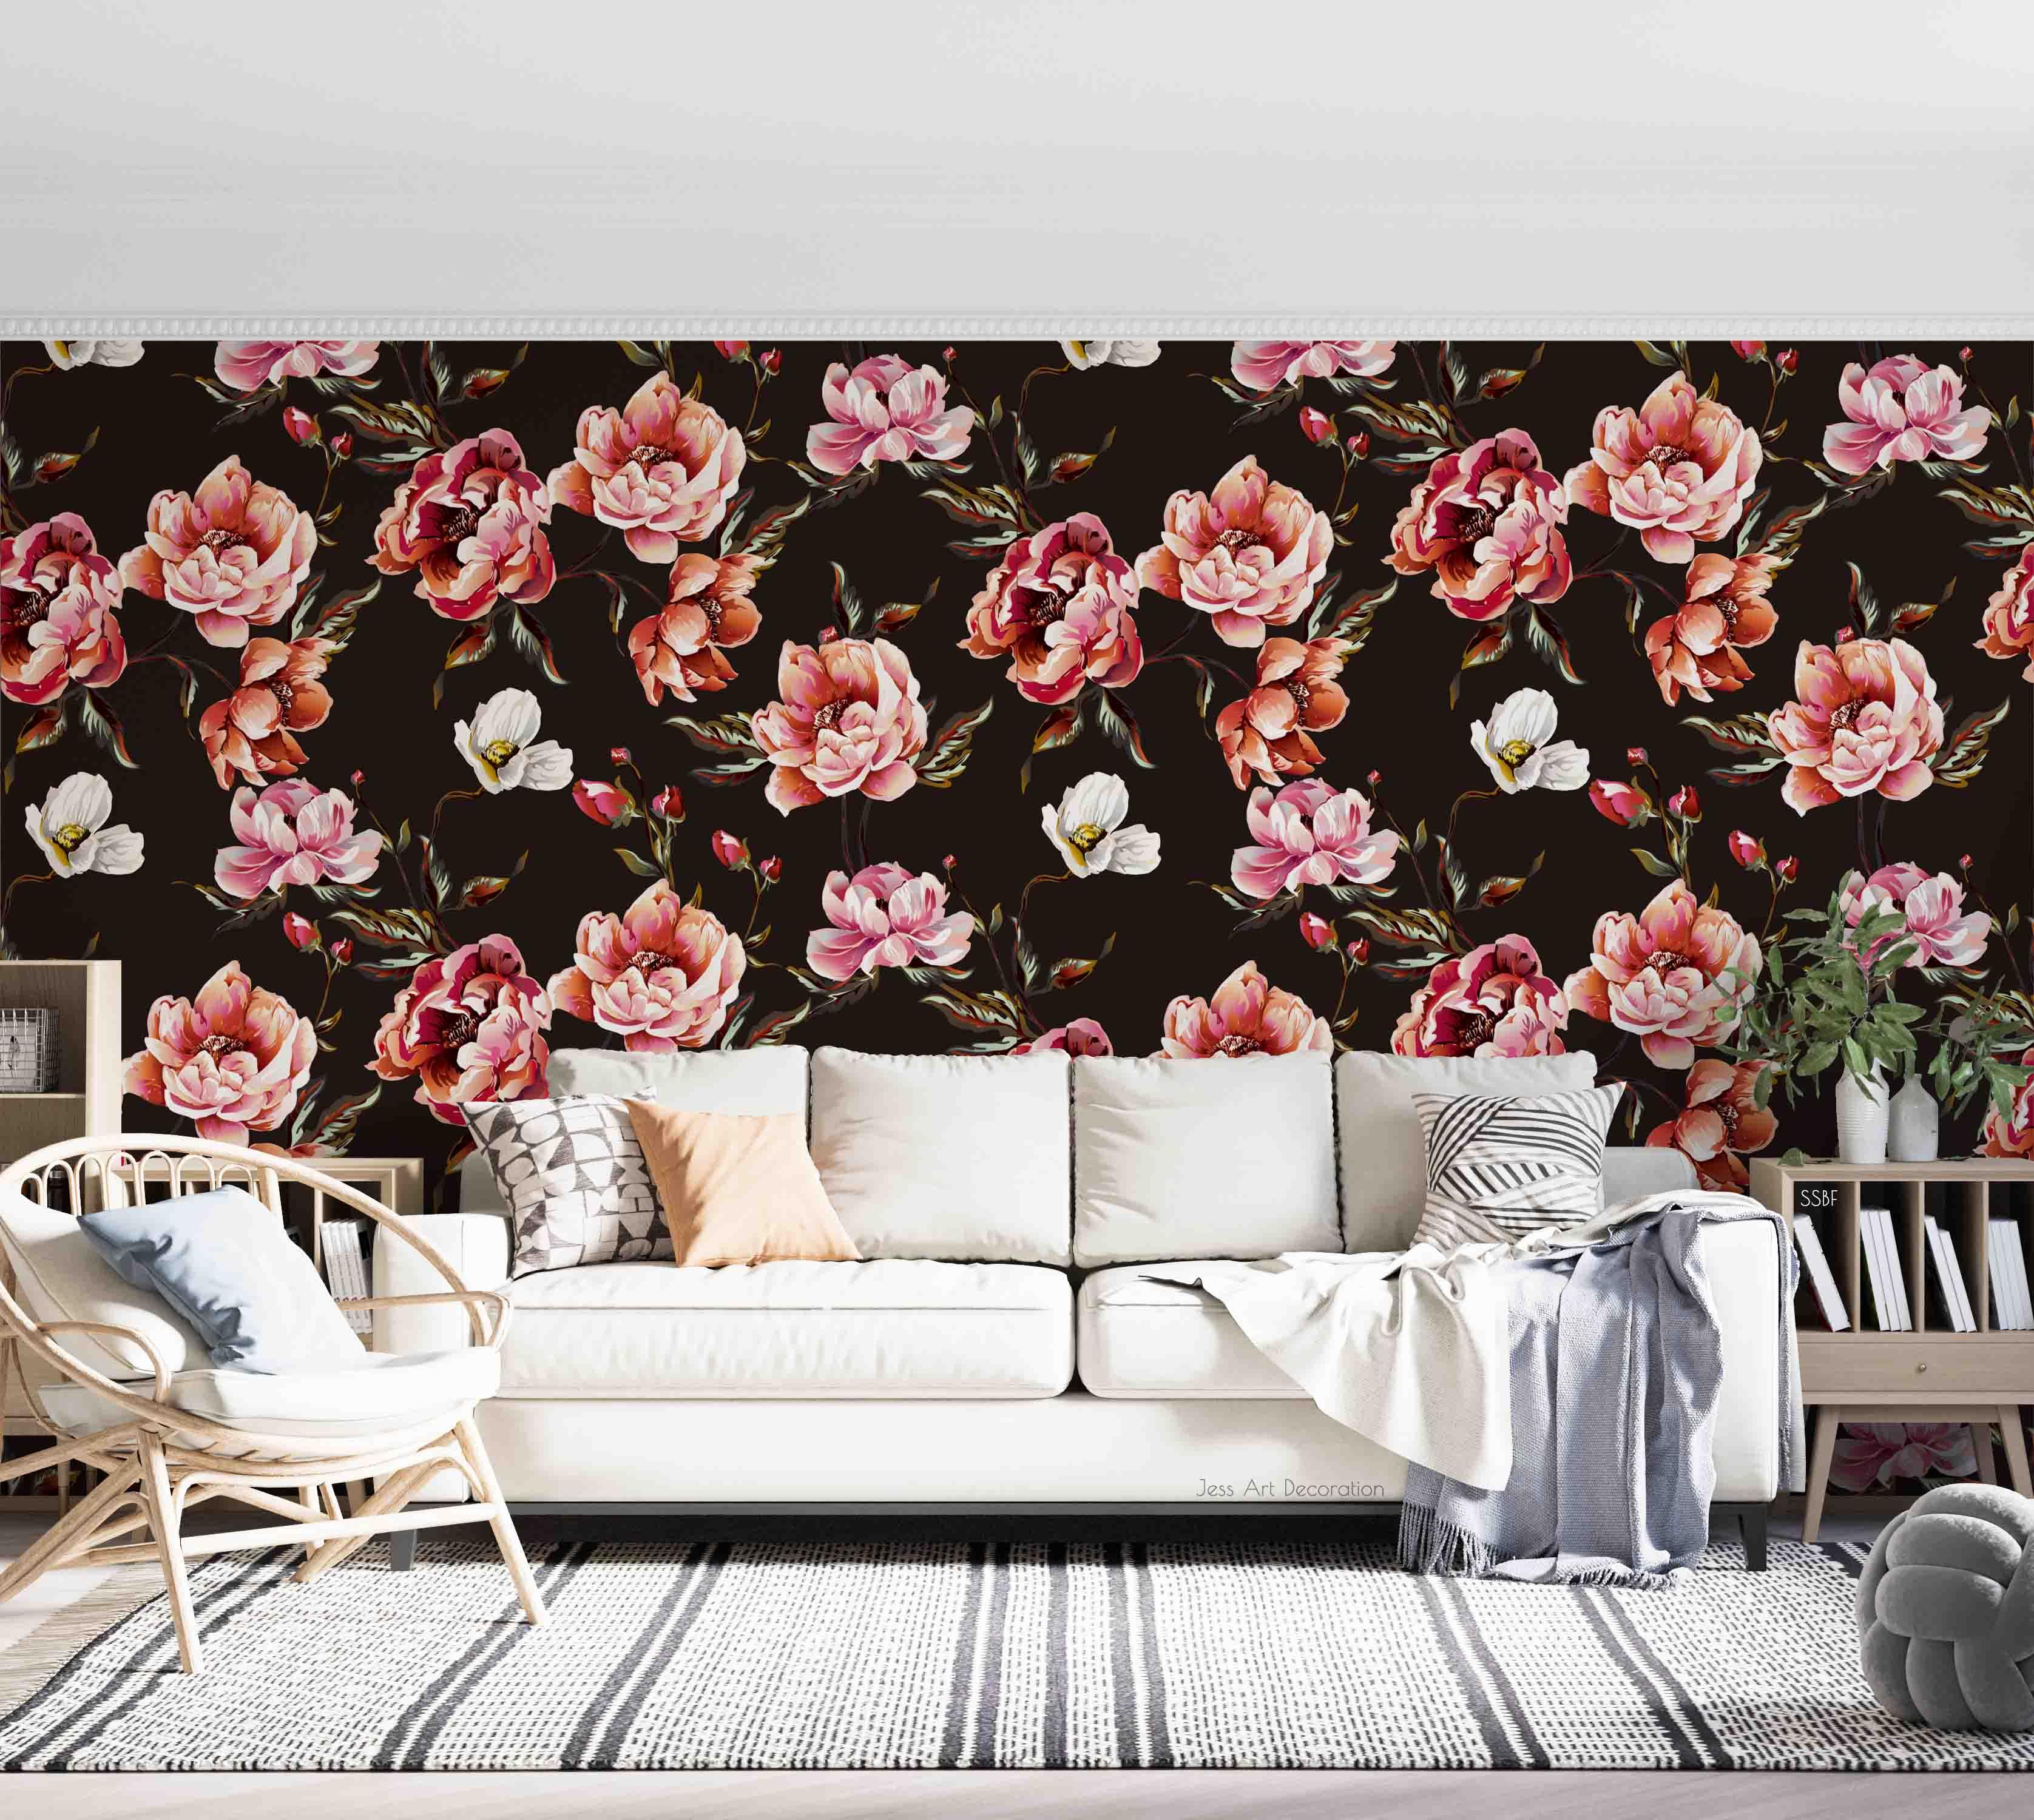 3D Vintage Baroque Art Blooming Pink Peony Background Wall Mural Wallpaper GD 3572- Jess Art Decoration